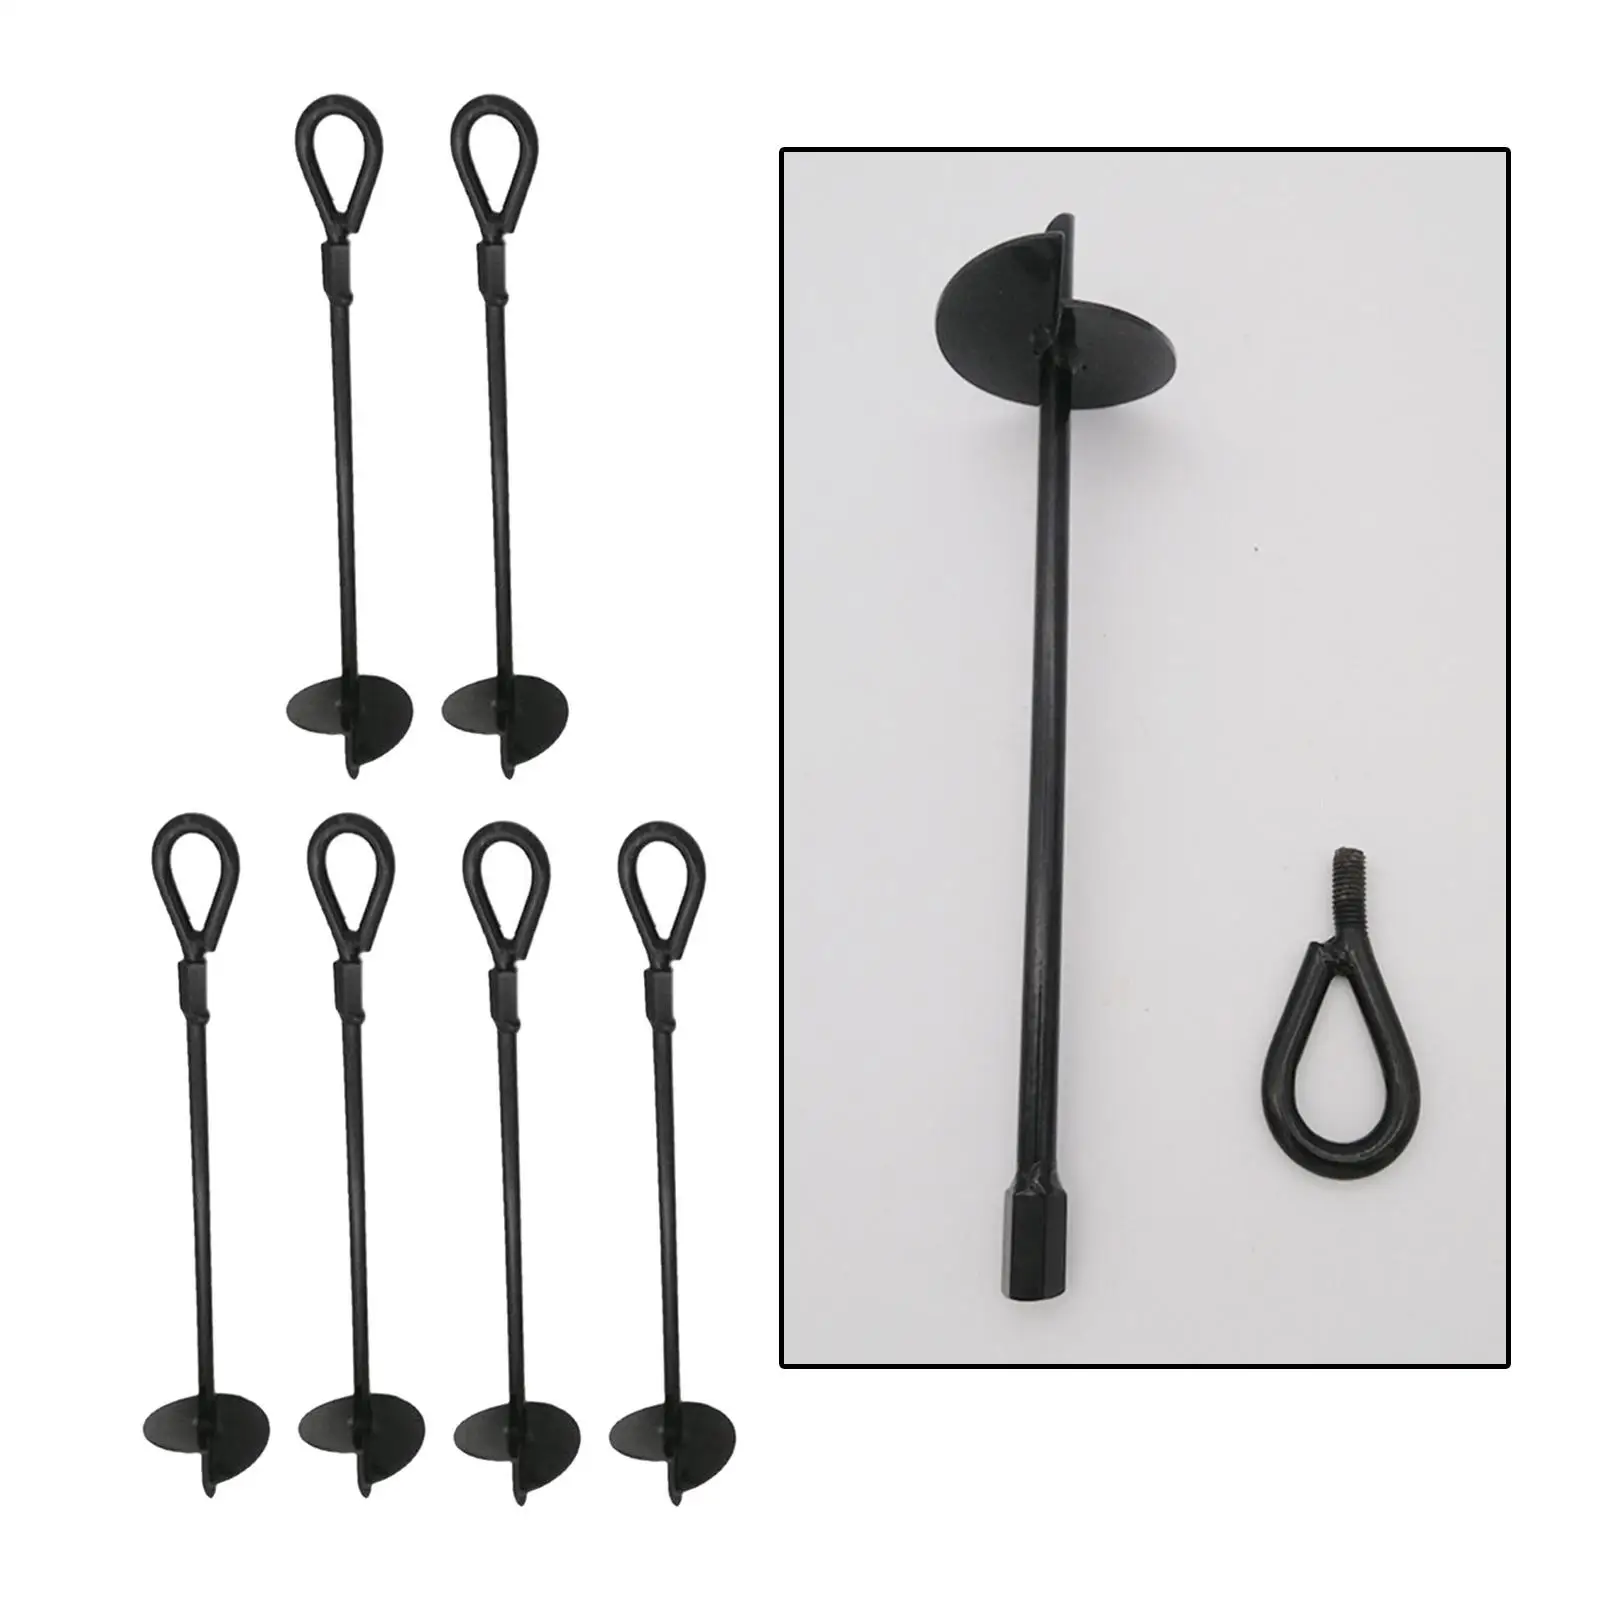  Anchors,   Stake Easy to Use Reusable  Drill Bit Anchor Hook for Hiking Car Ports Canopies Swing Picnic